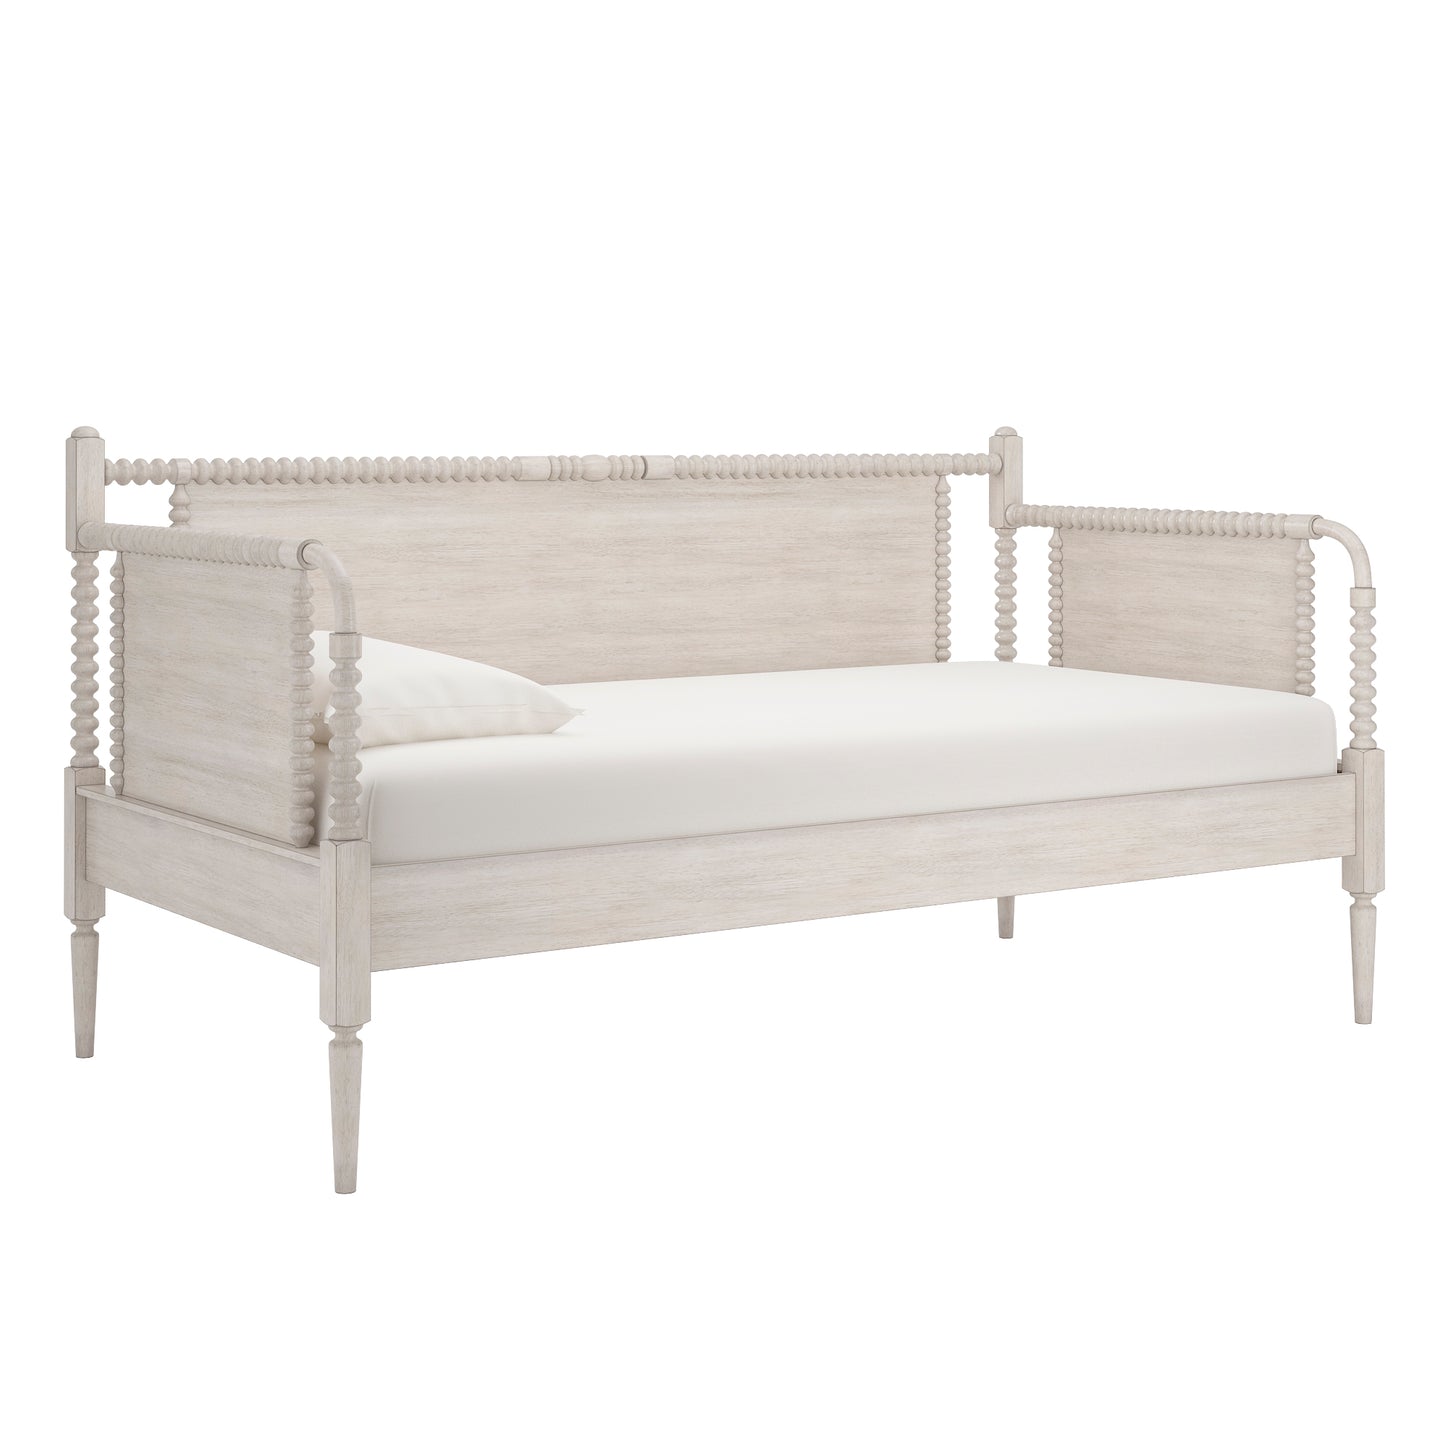 Traditional Beaded Wood Daybed - Antique White, No Trundle